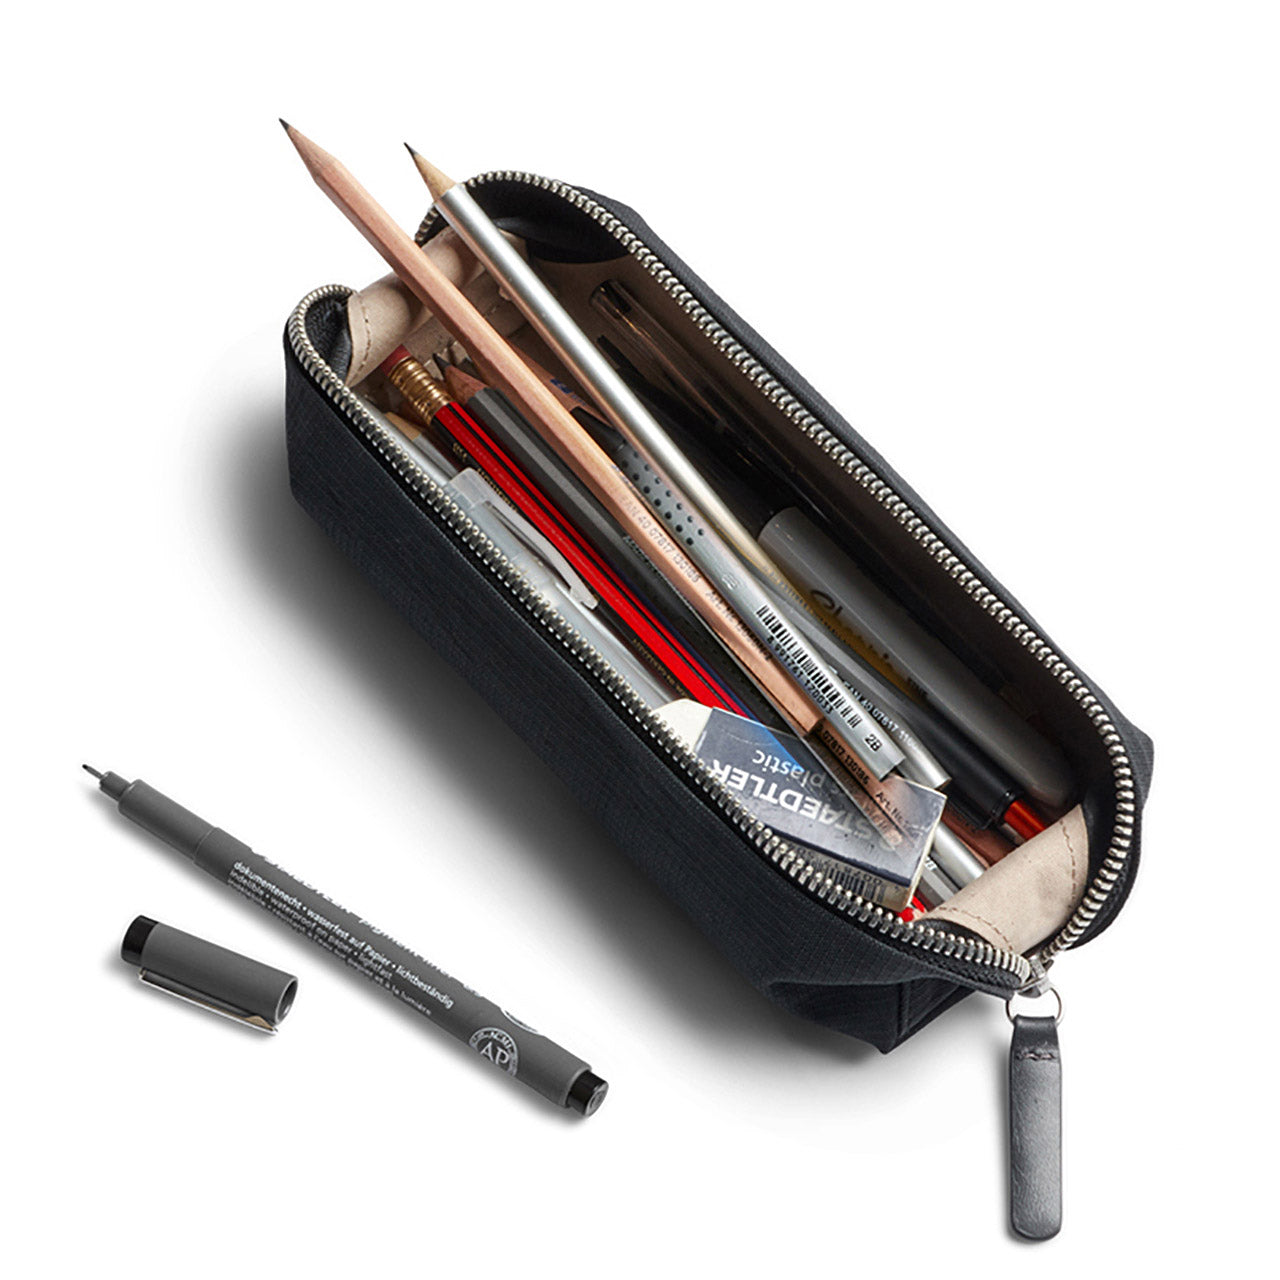 Bellroy Pencil Case - A Stylish Case for Your Writing Instruments